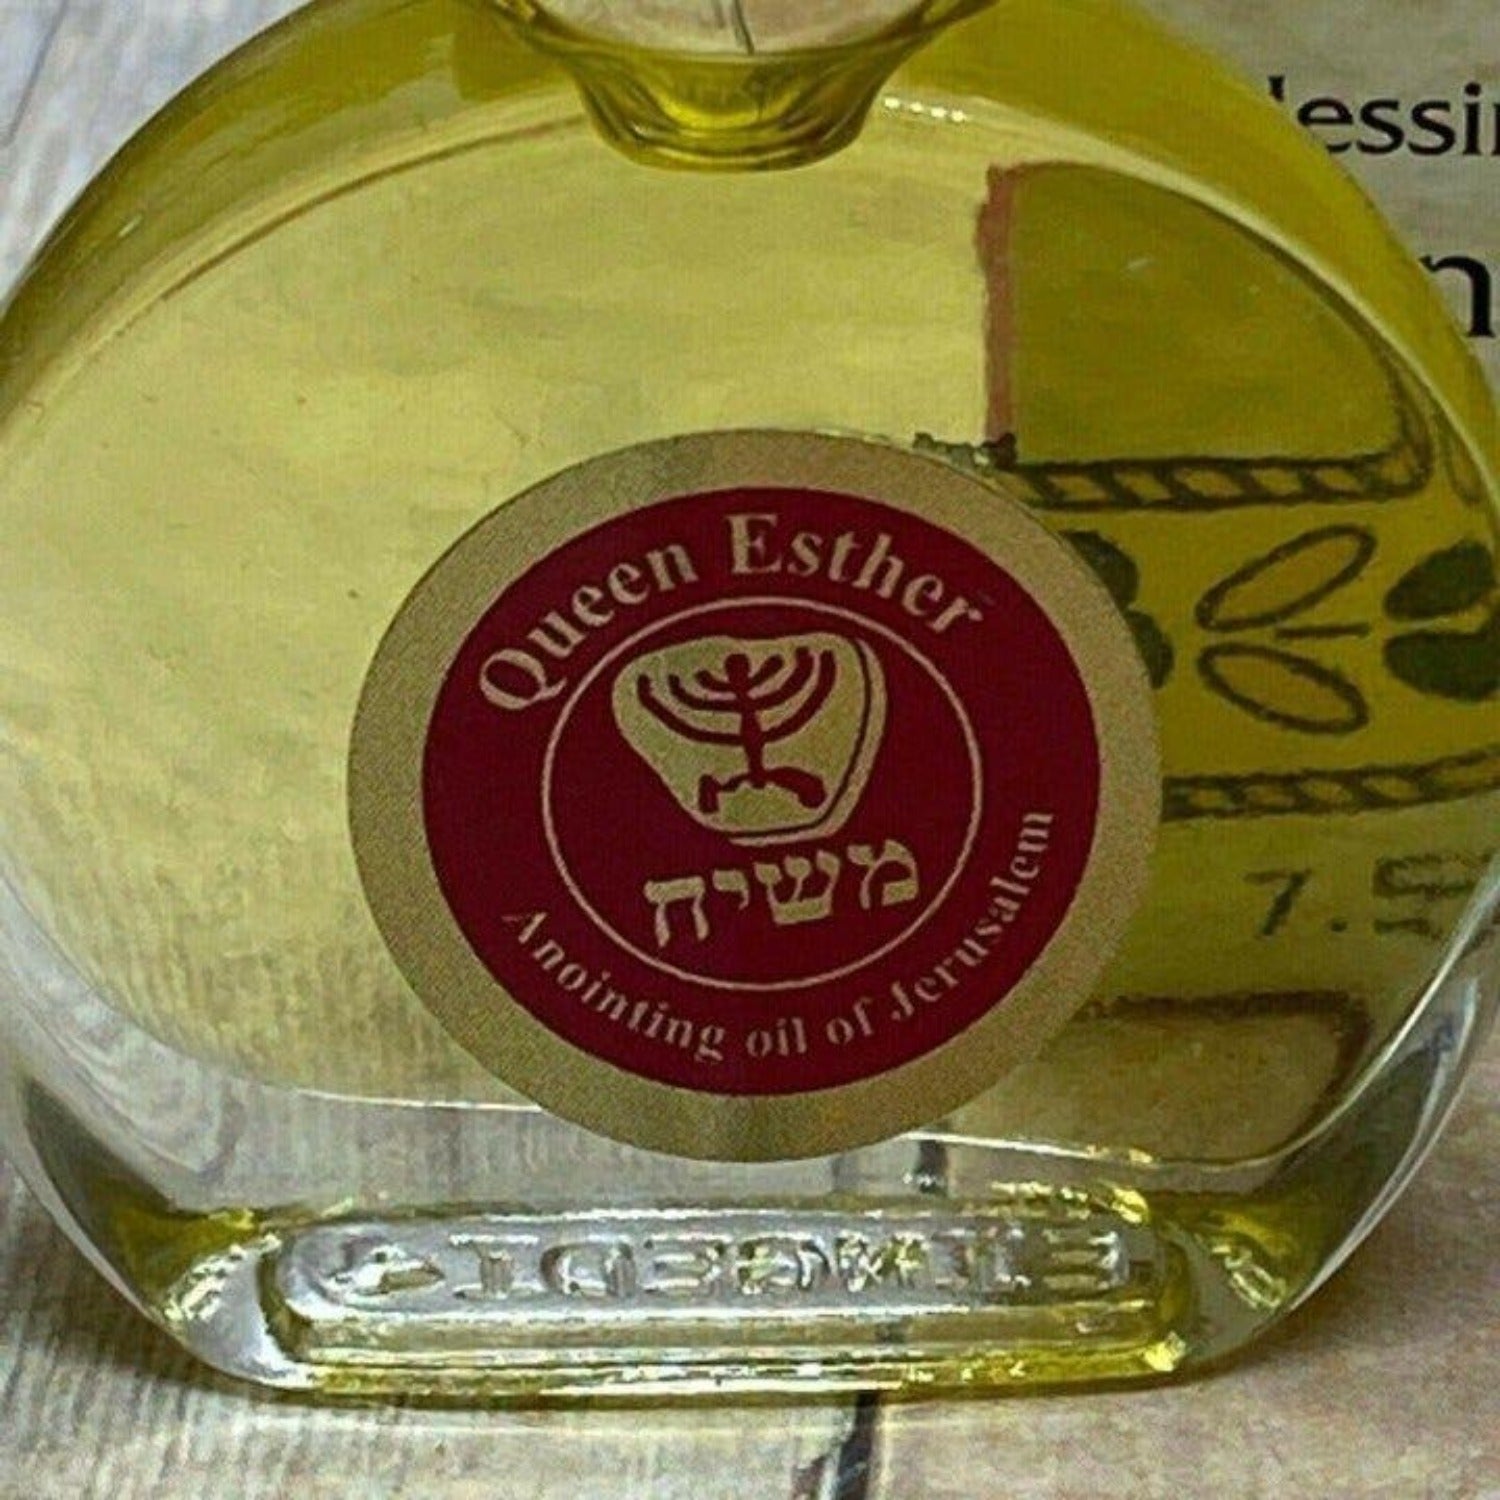 Queen Esther Ein Gedi Holy Anointing Oil 7.5 ML